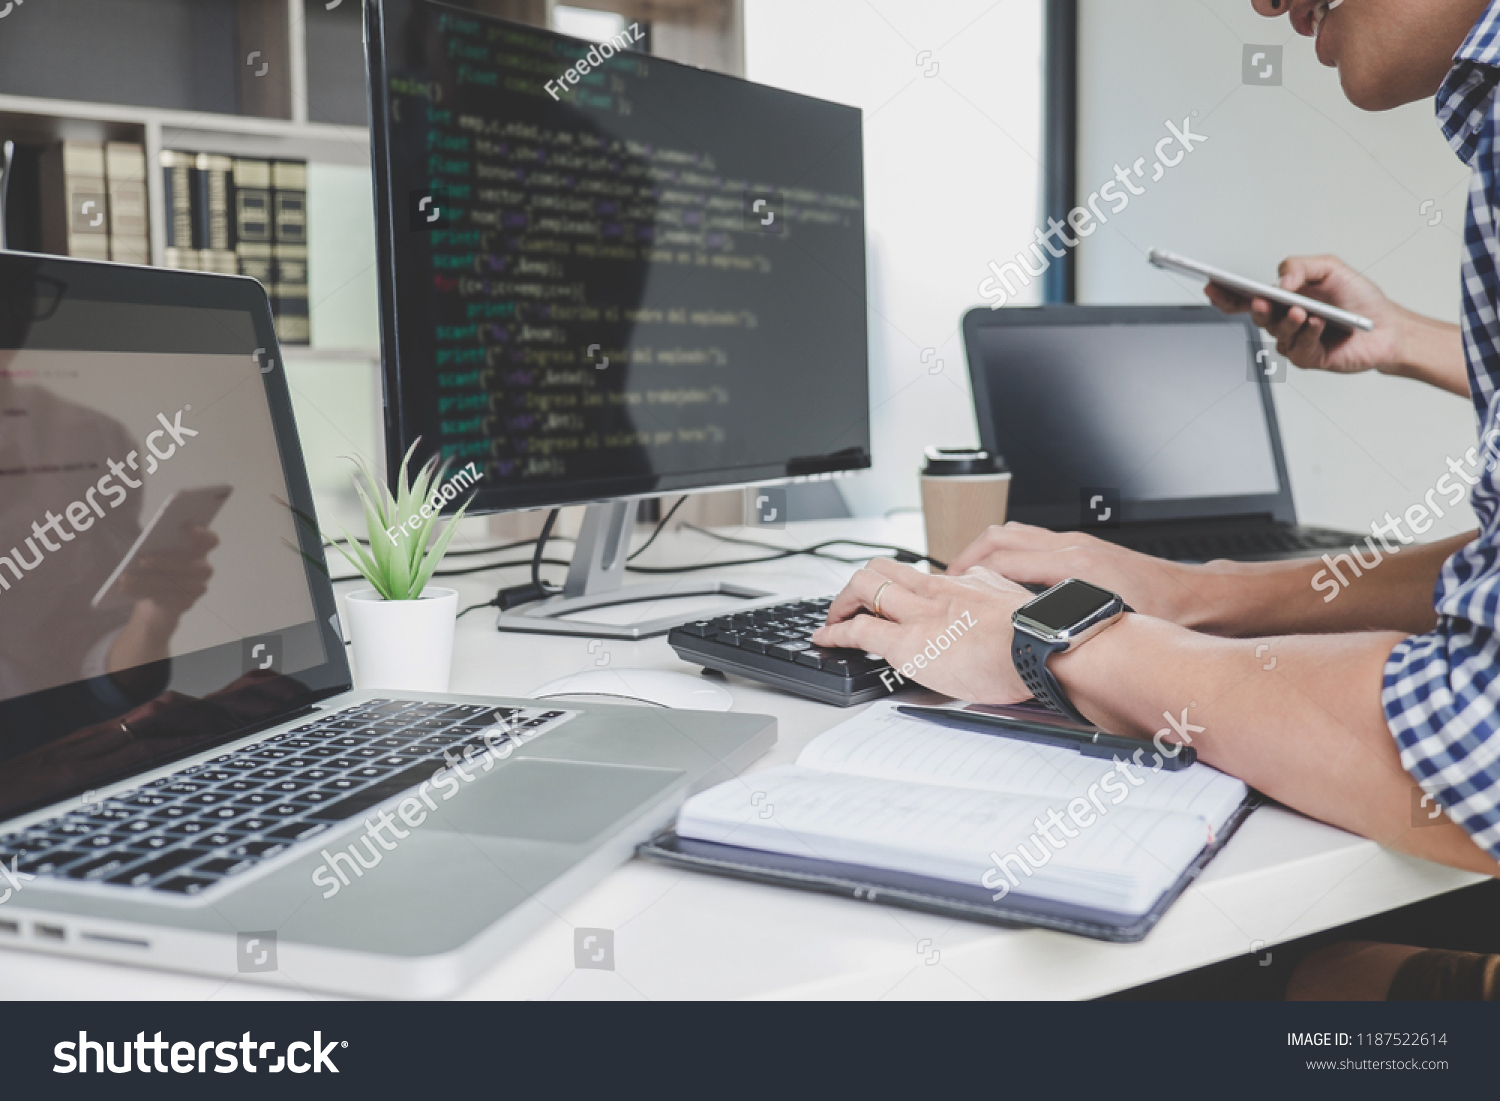 Programmers cooperating at Developing programming and website working in a software develop company office, writing codes and typing data code. #1187522614